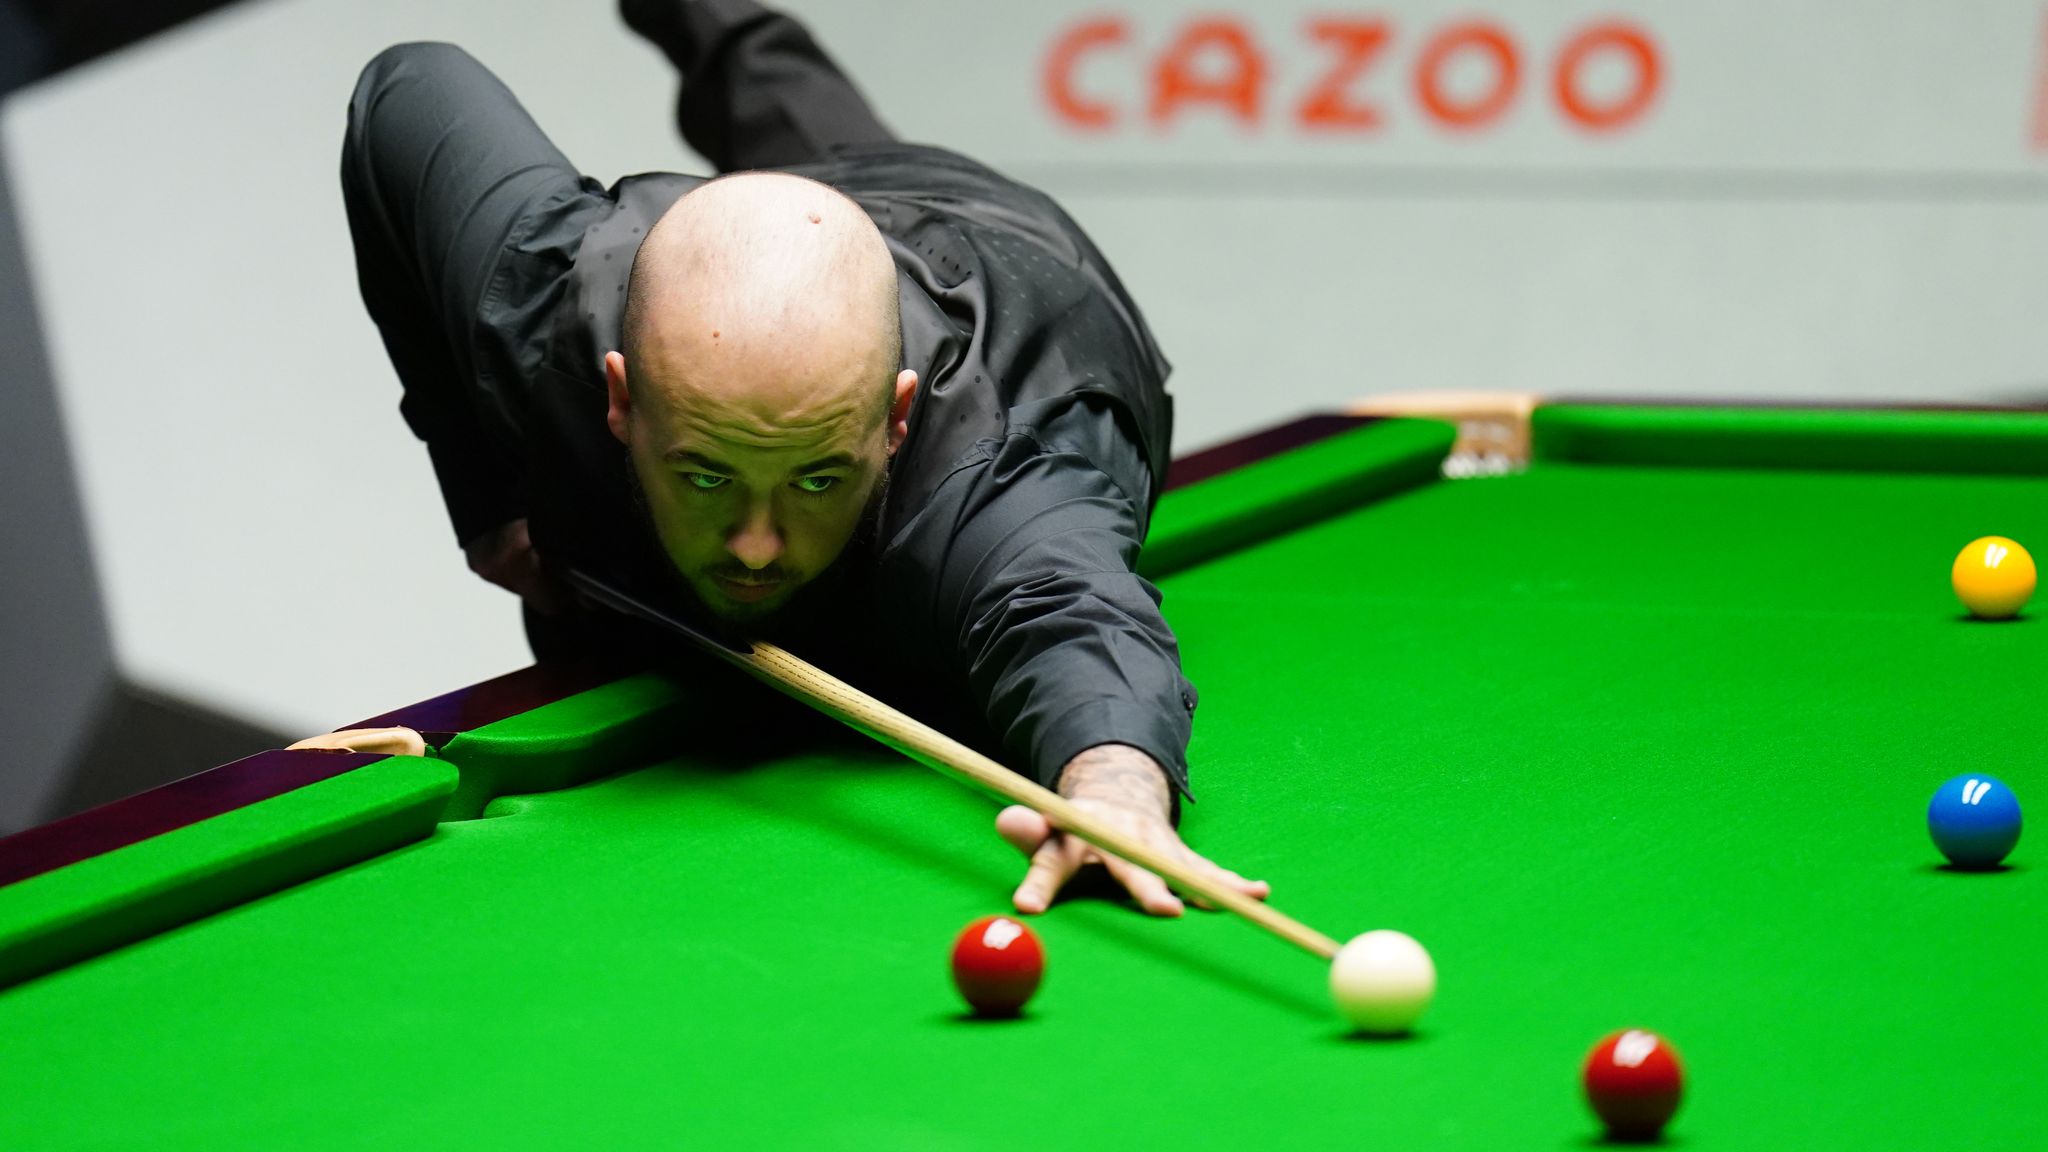 World Snooker Championship Mark Selby makes historic 147 break in final at the Crucible News Sky Sports